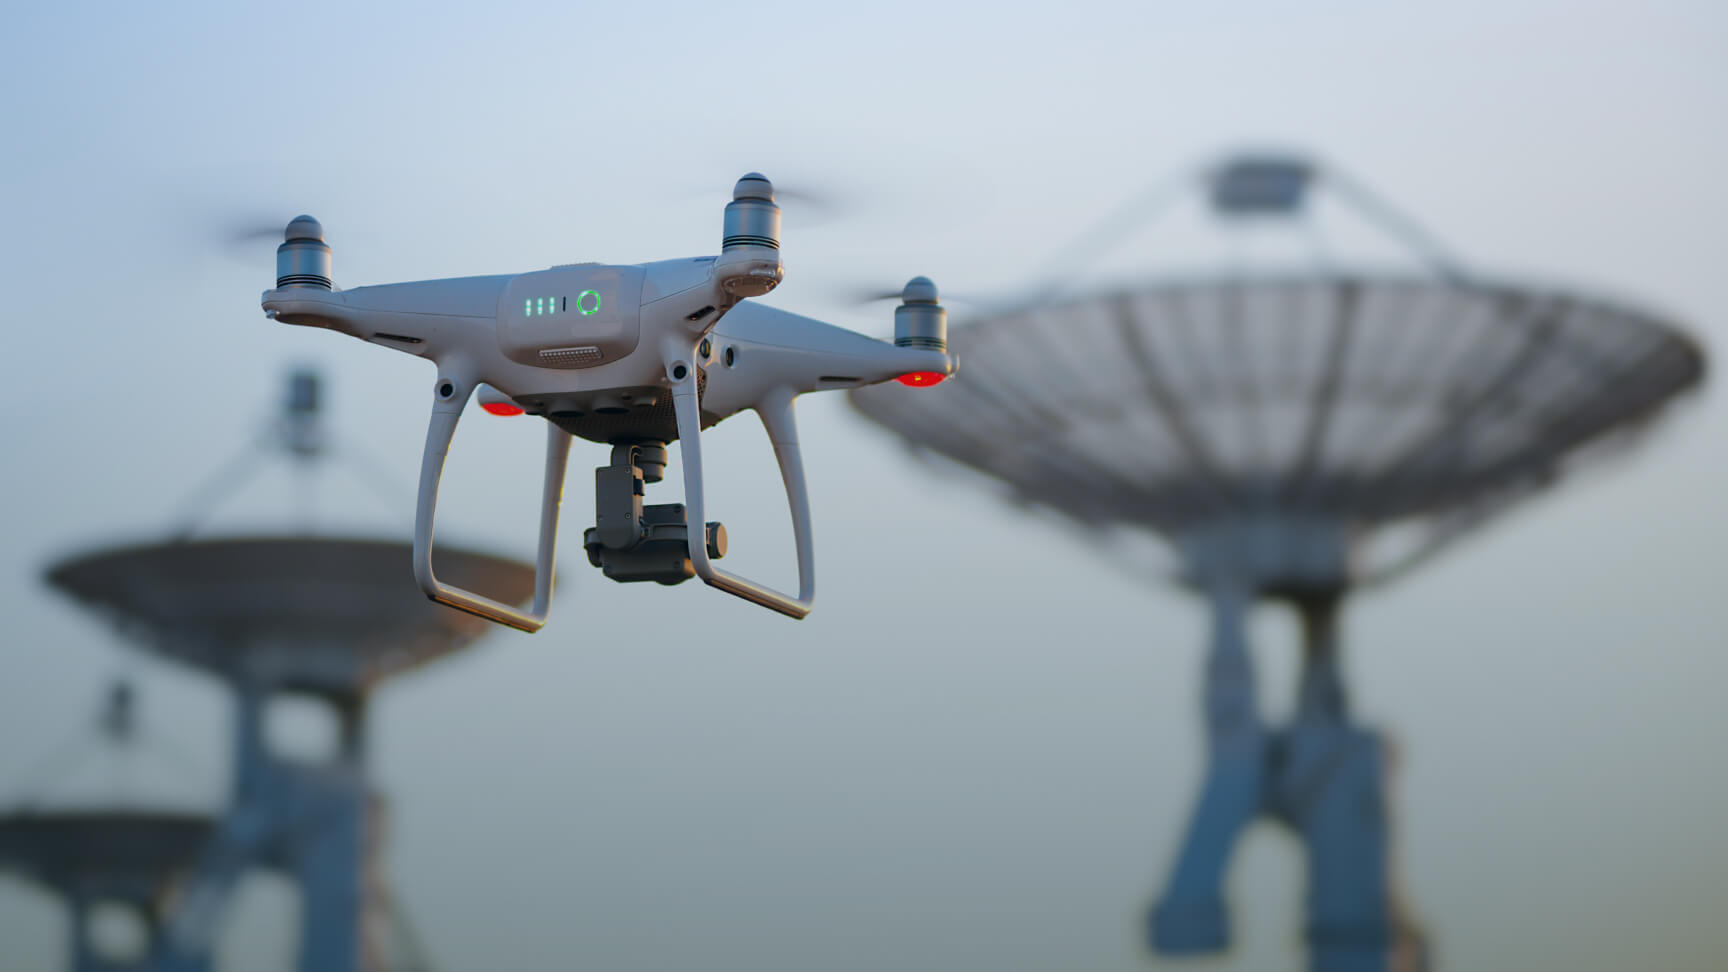 Is DJI Aeroscope a Threat to National Security?